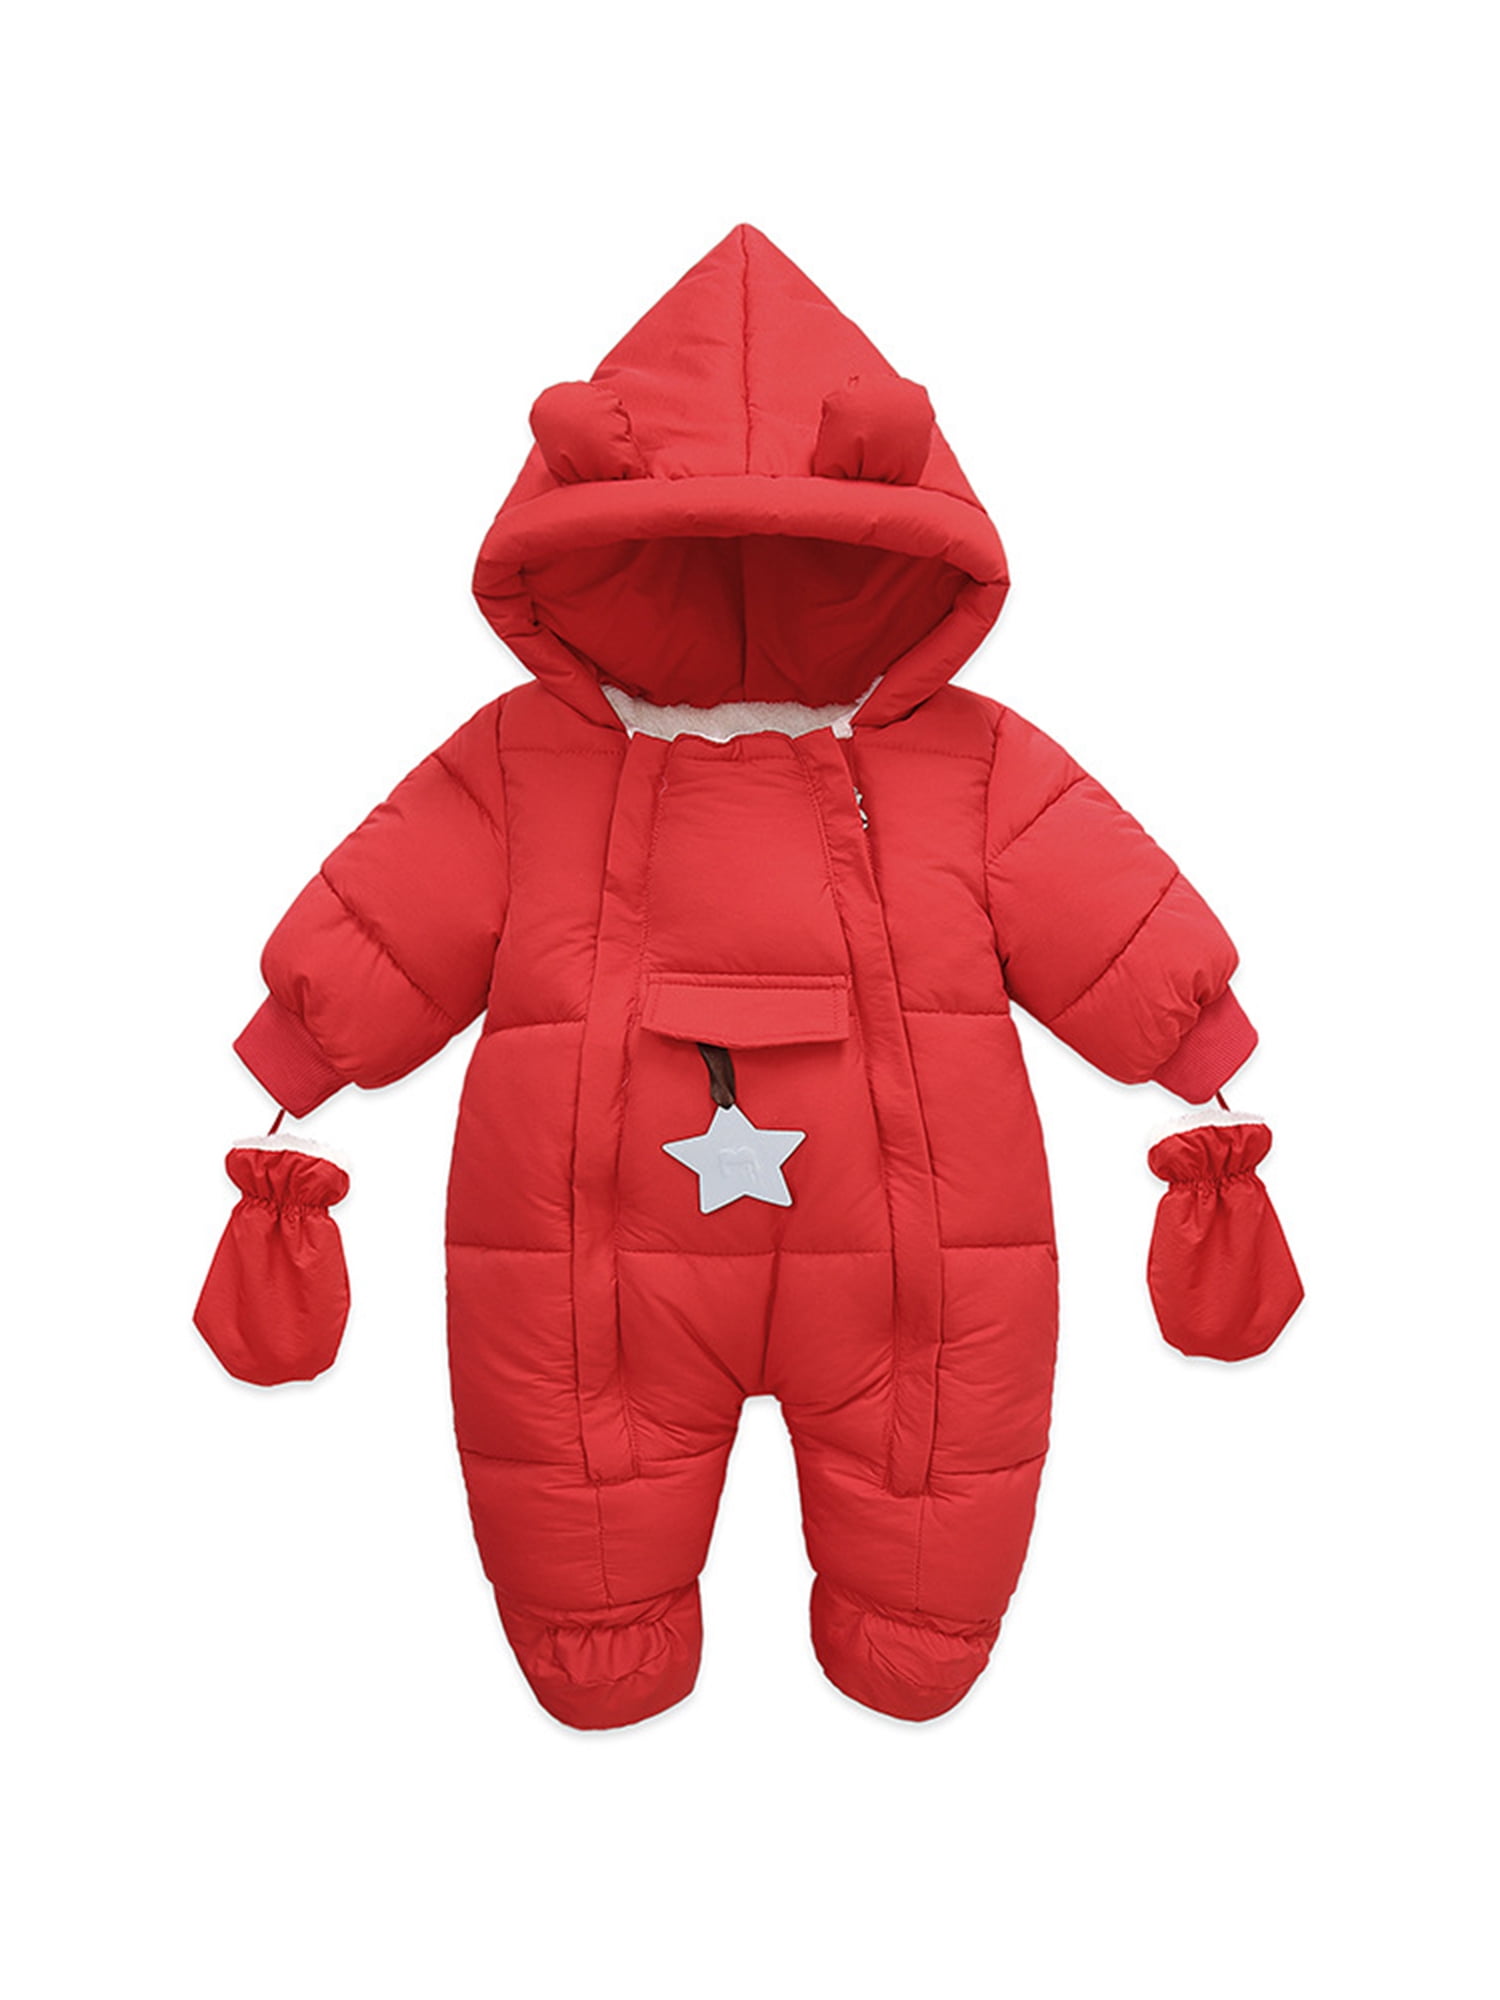 Famuka Baby Snowsuit Romper Fleece Lined Outwear Winter Warm Outfit with Gloves 